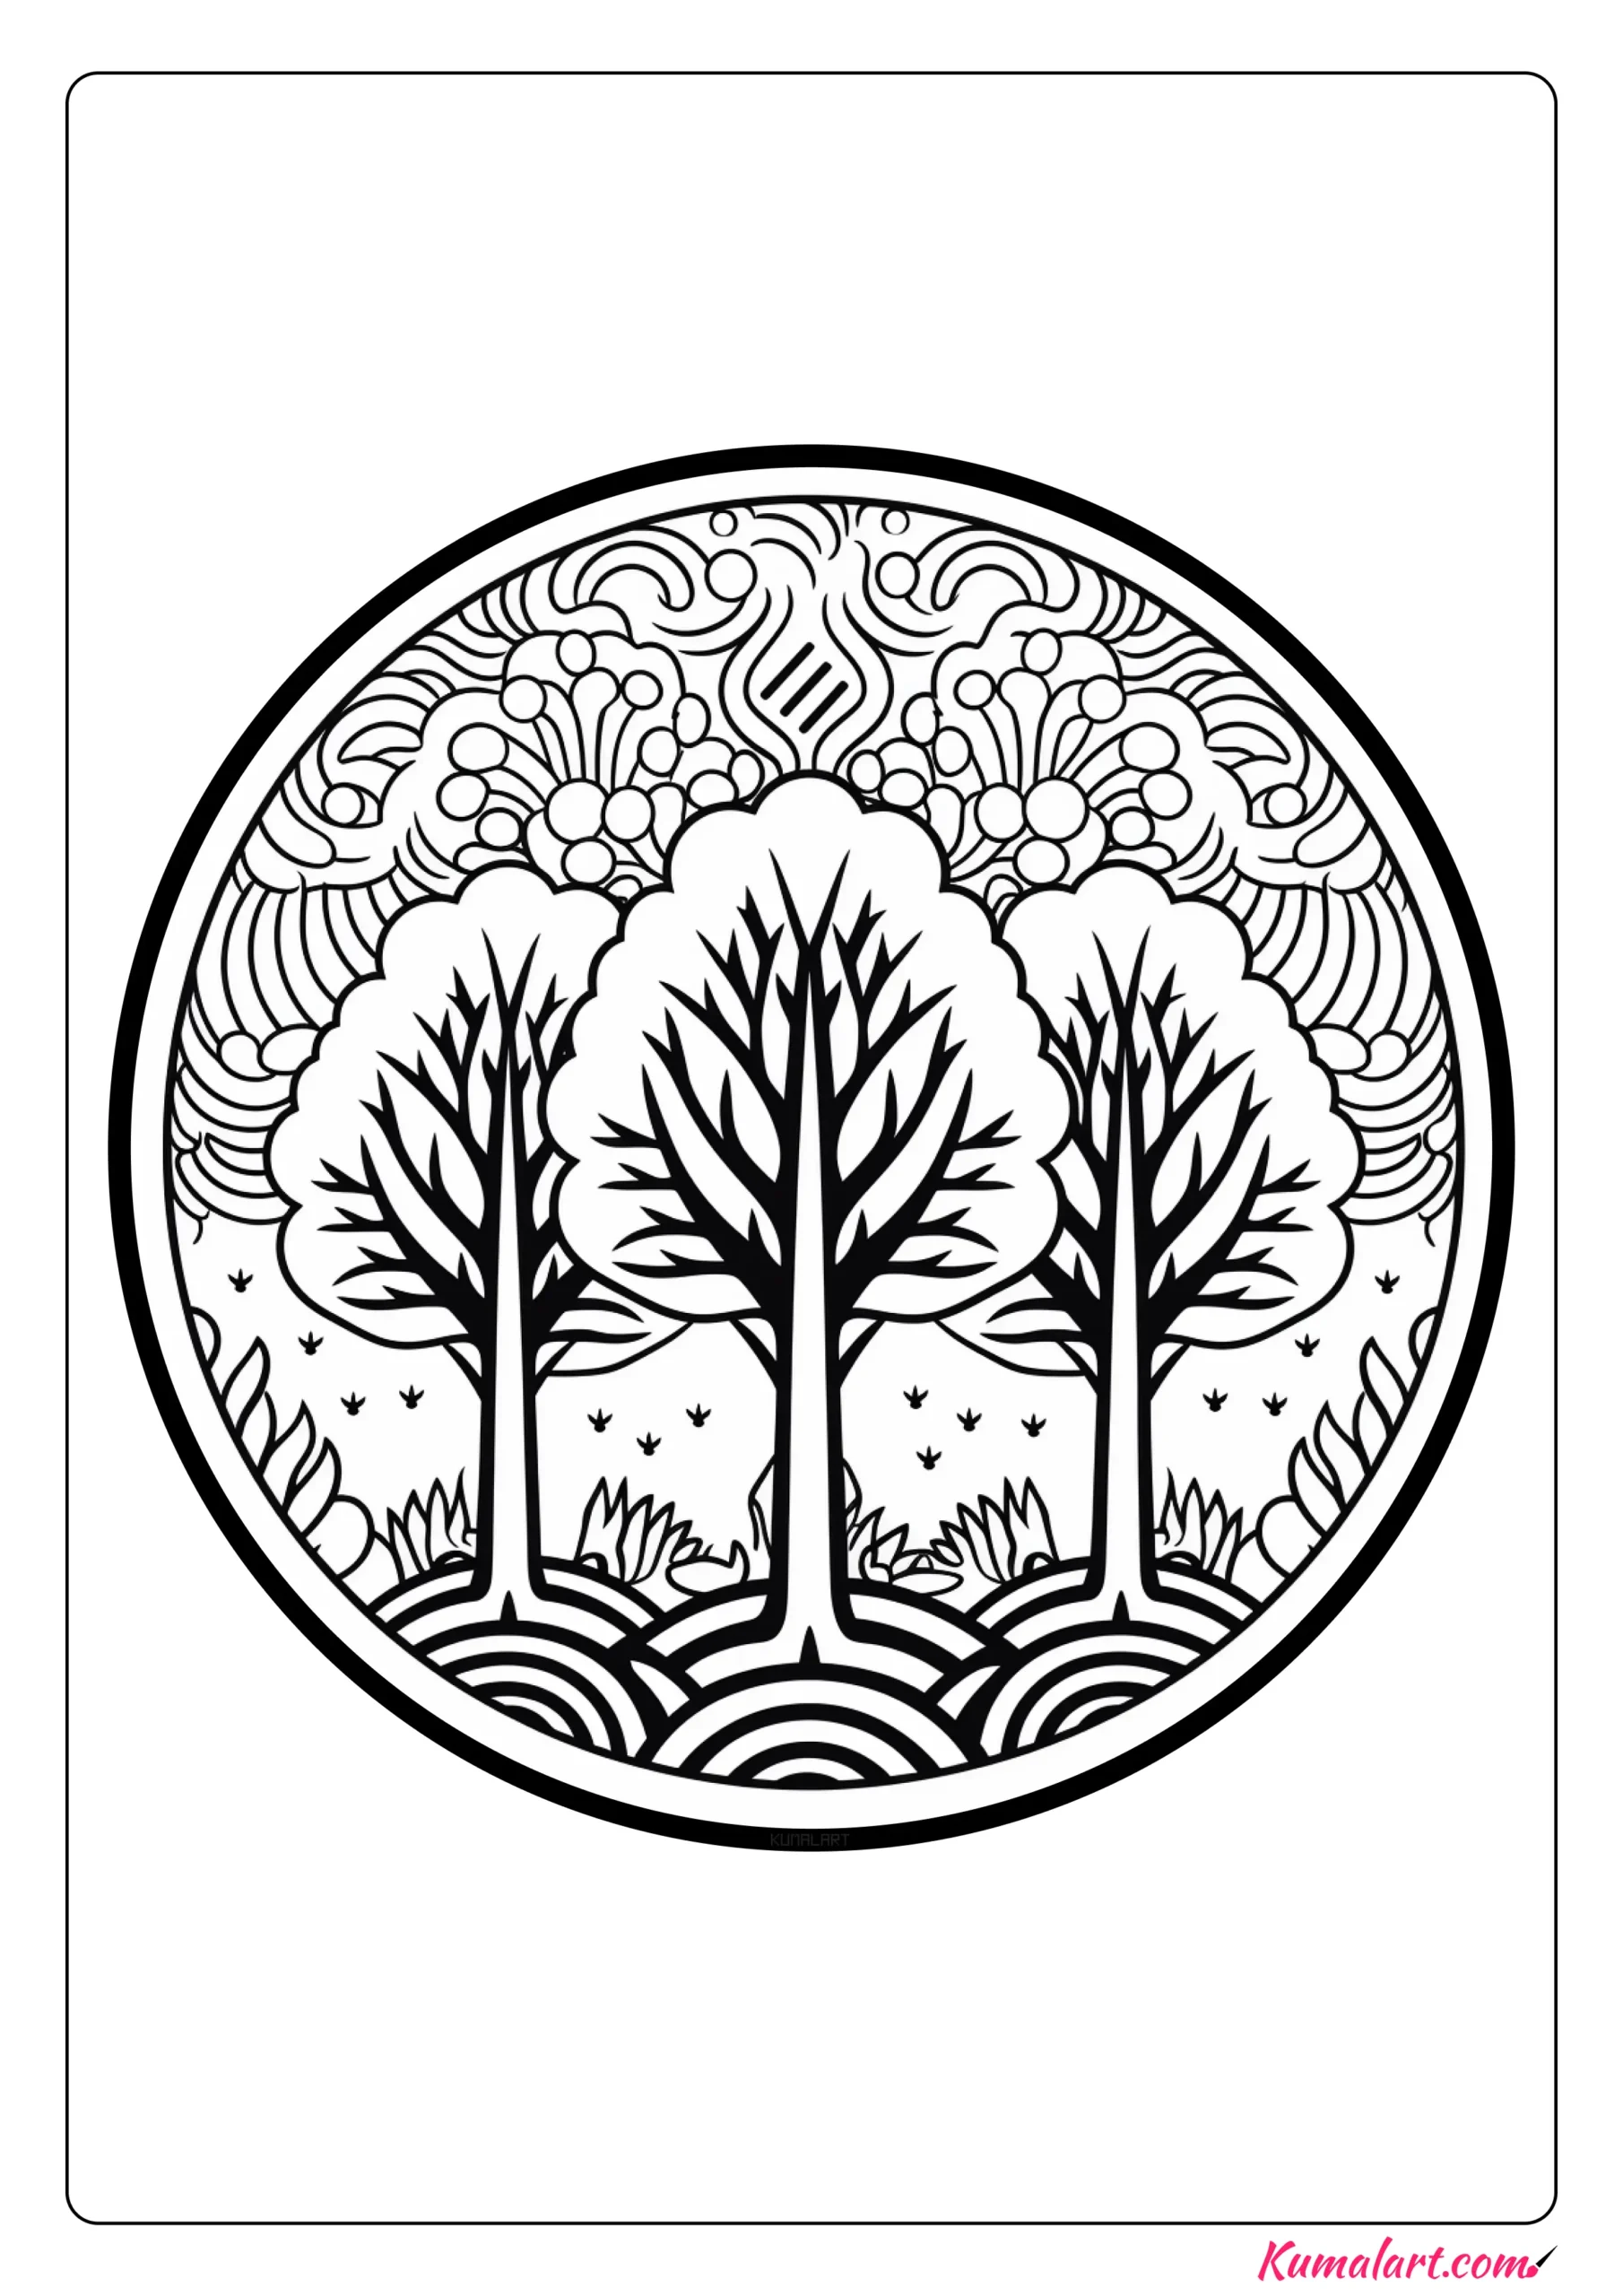 Dense Forest Mandala Coloring Page